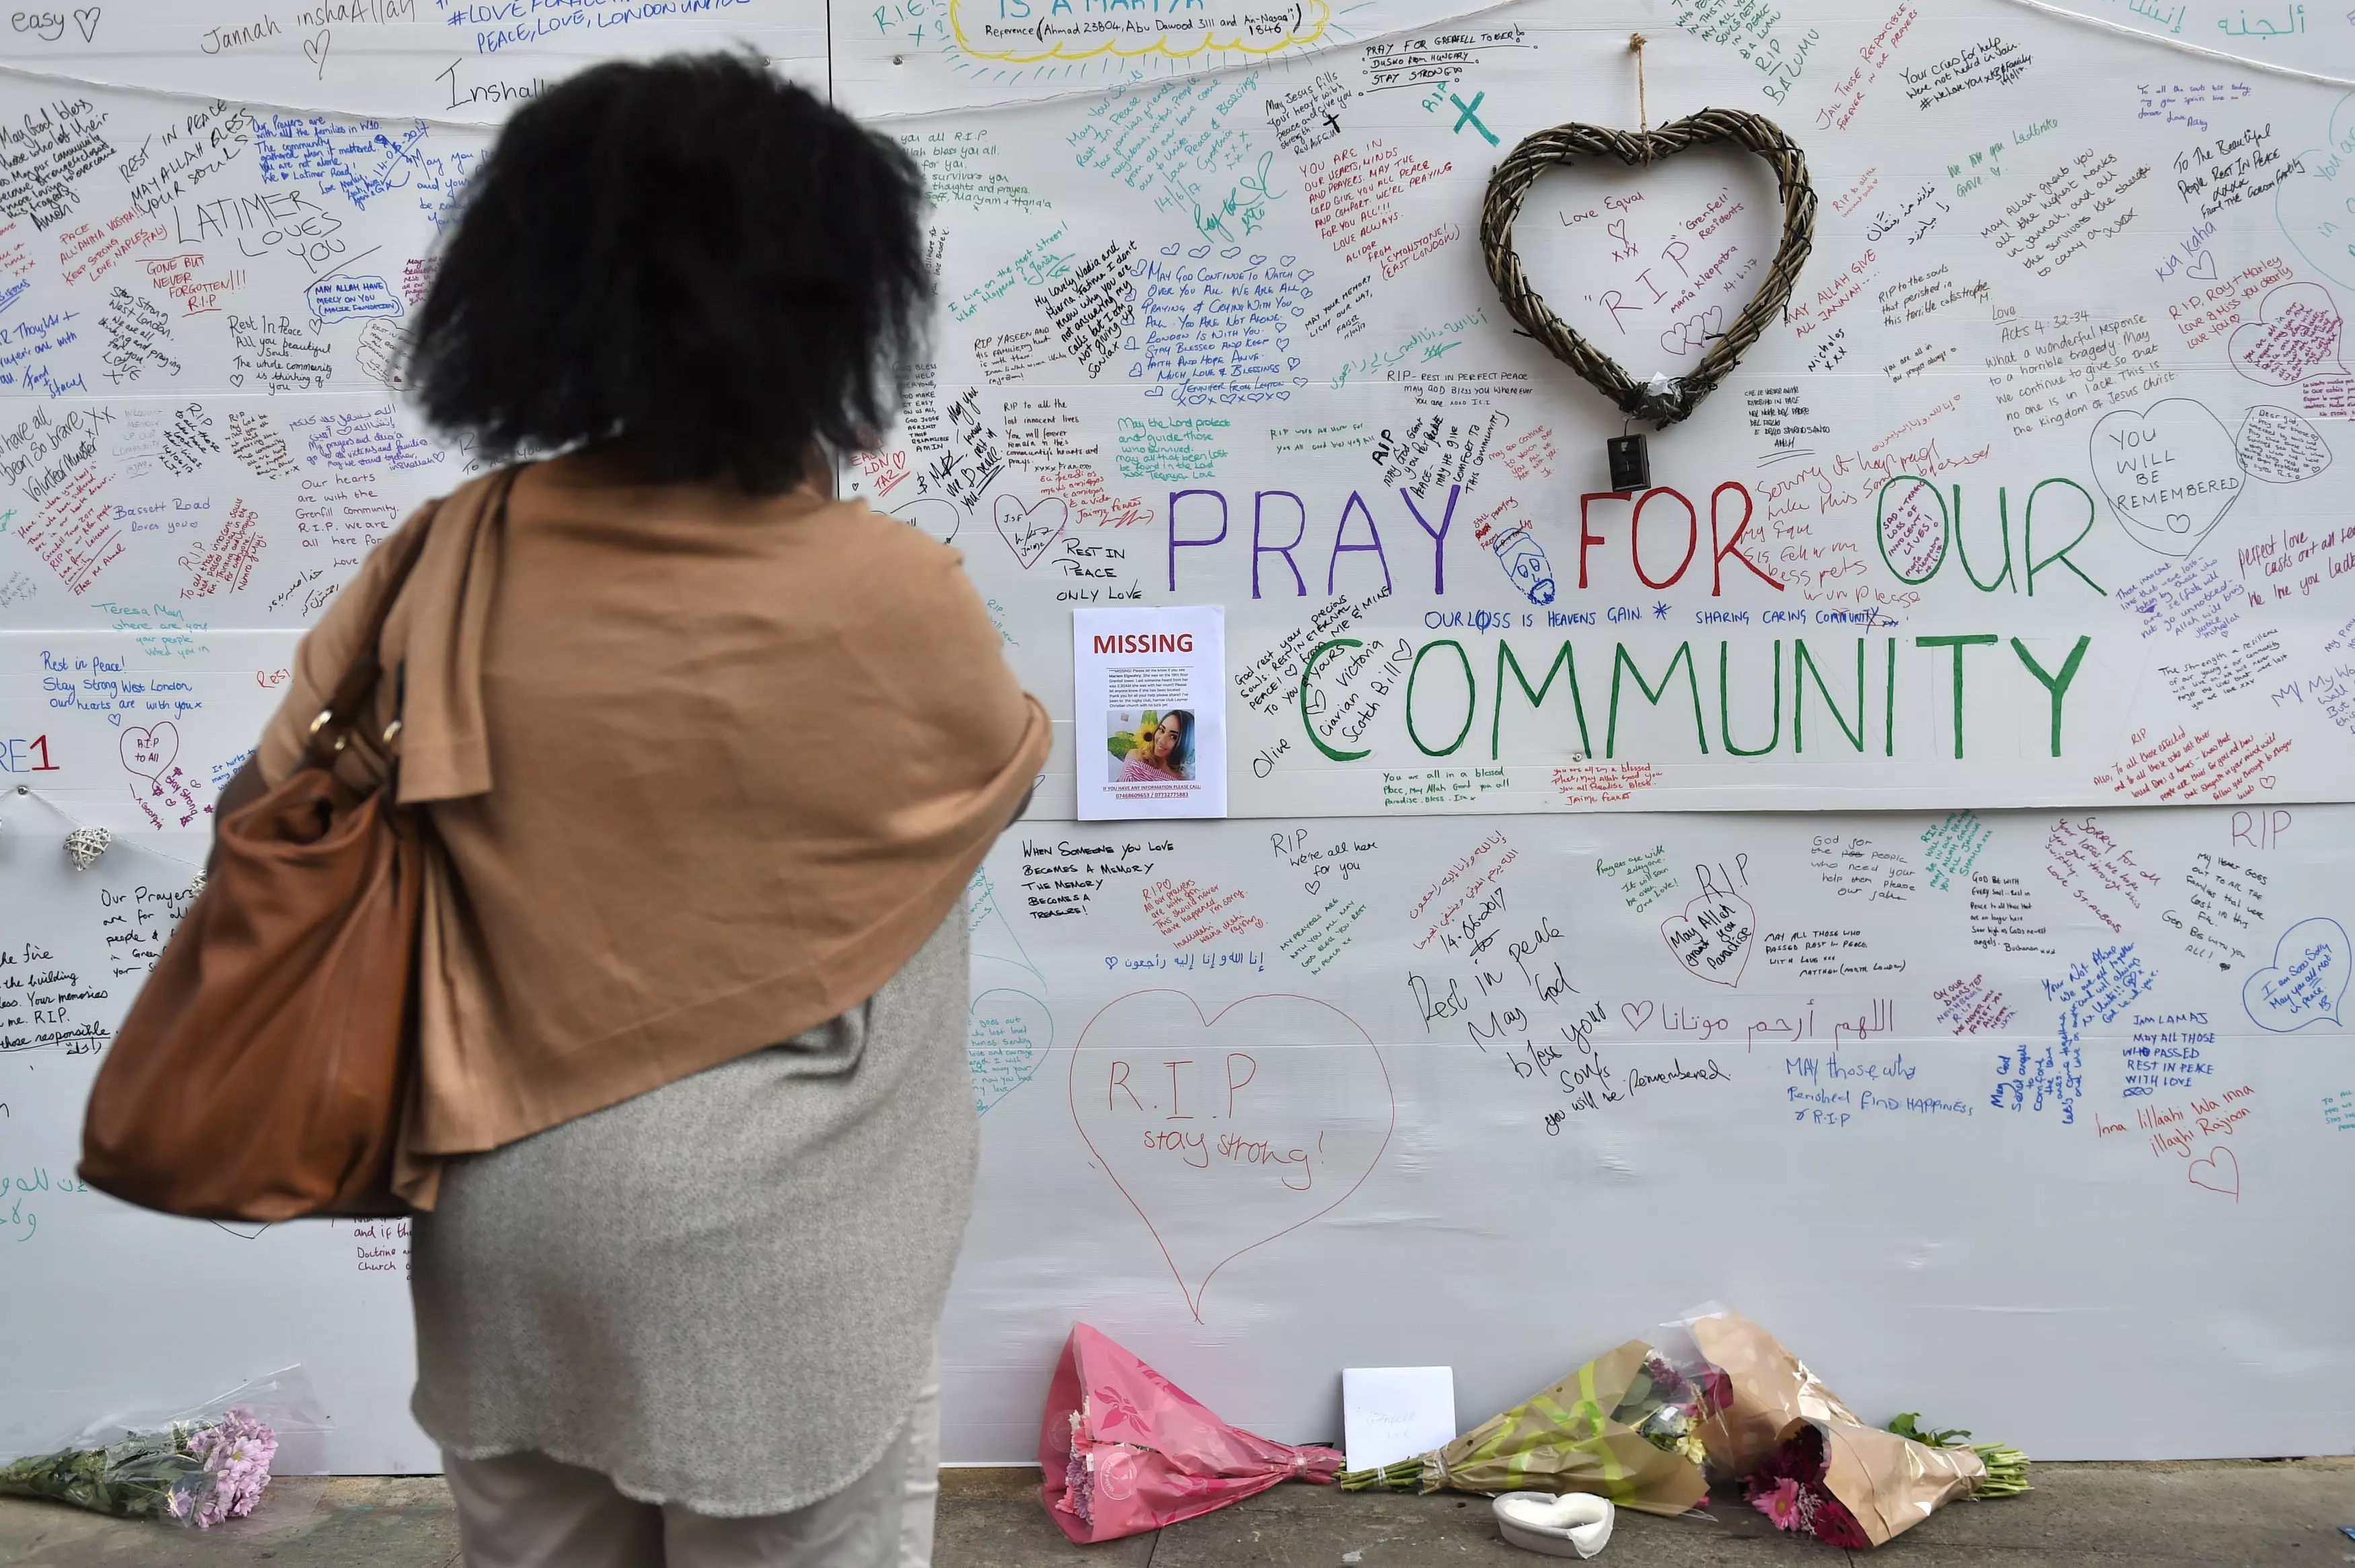 People write messages about Grenfell Tower